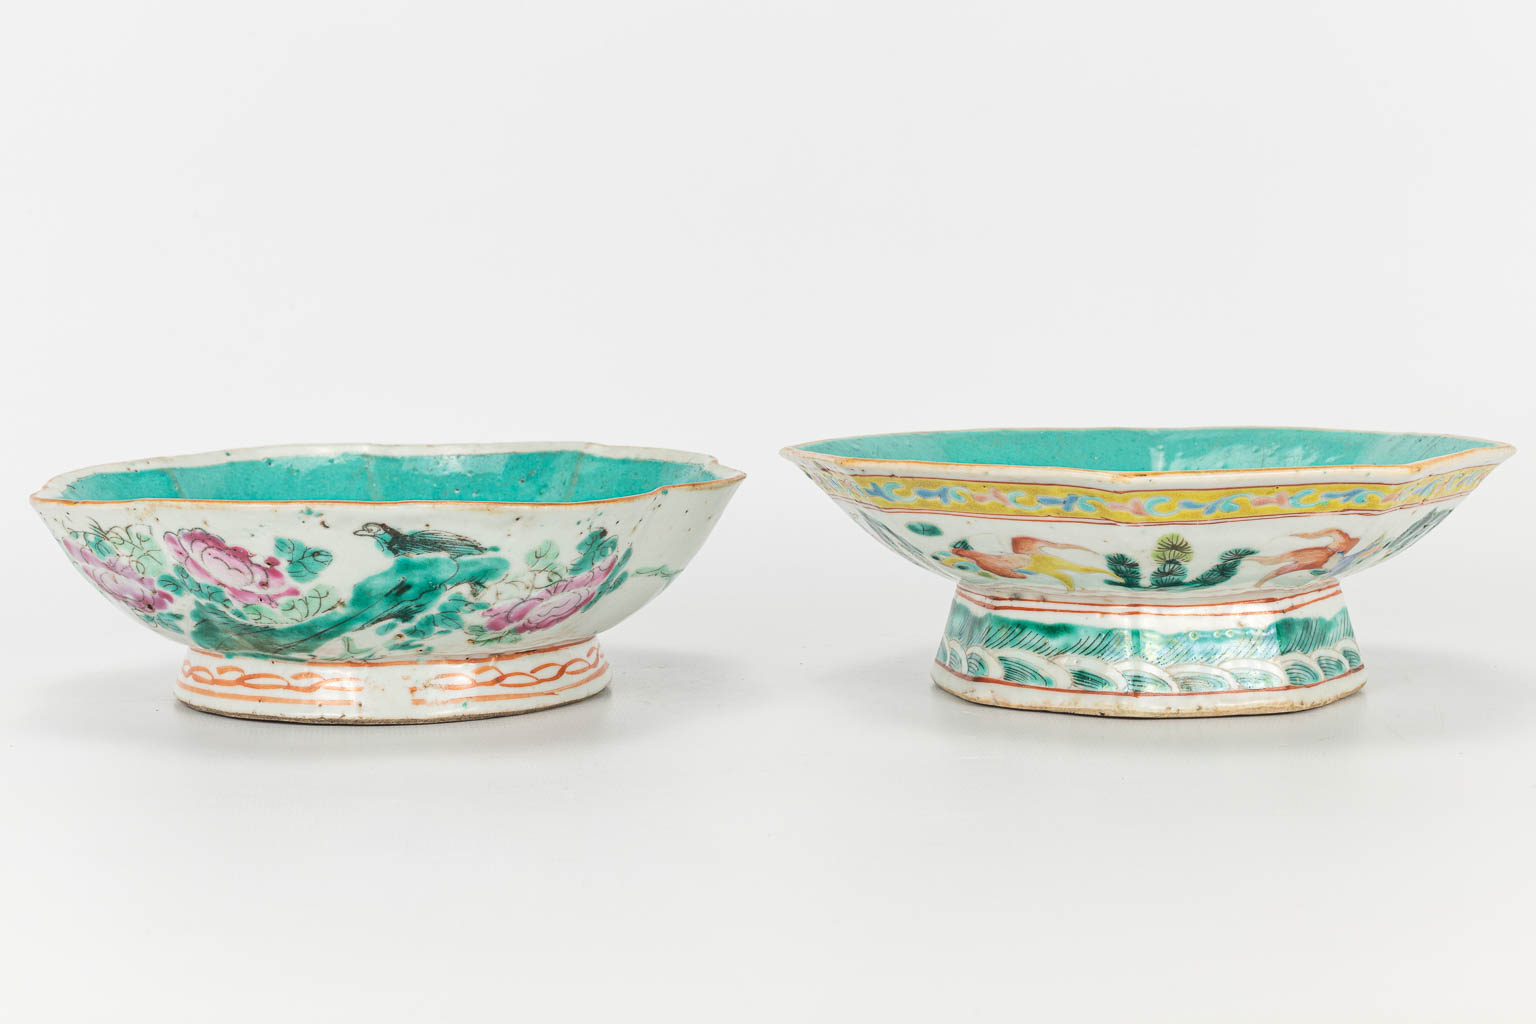 A set of 4 items made of Chinese porcelain. 2 small bowls and 2 ginger jars without lids.